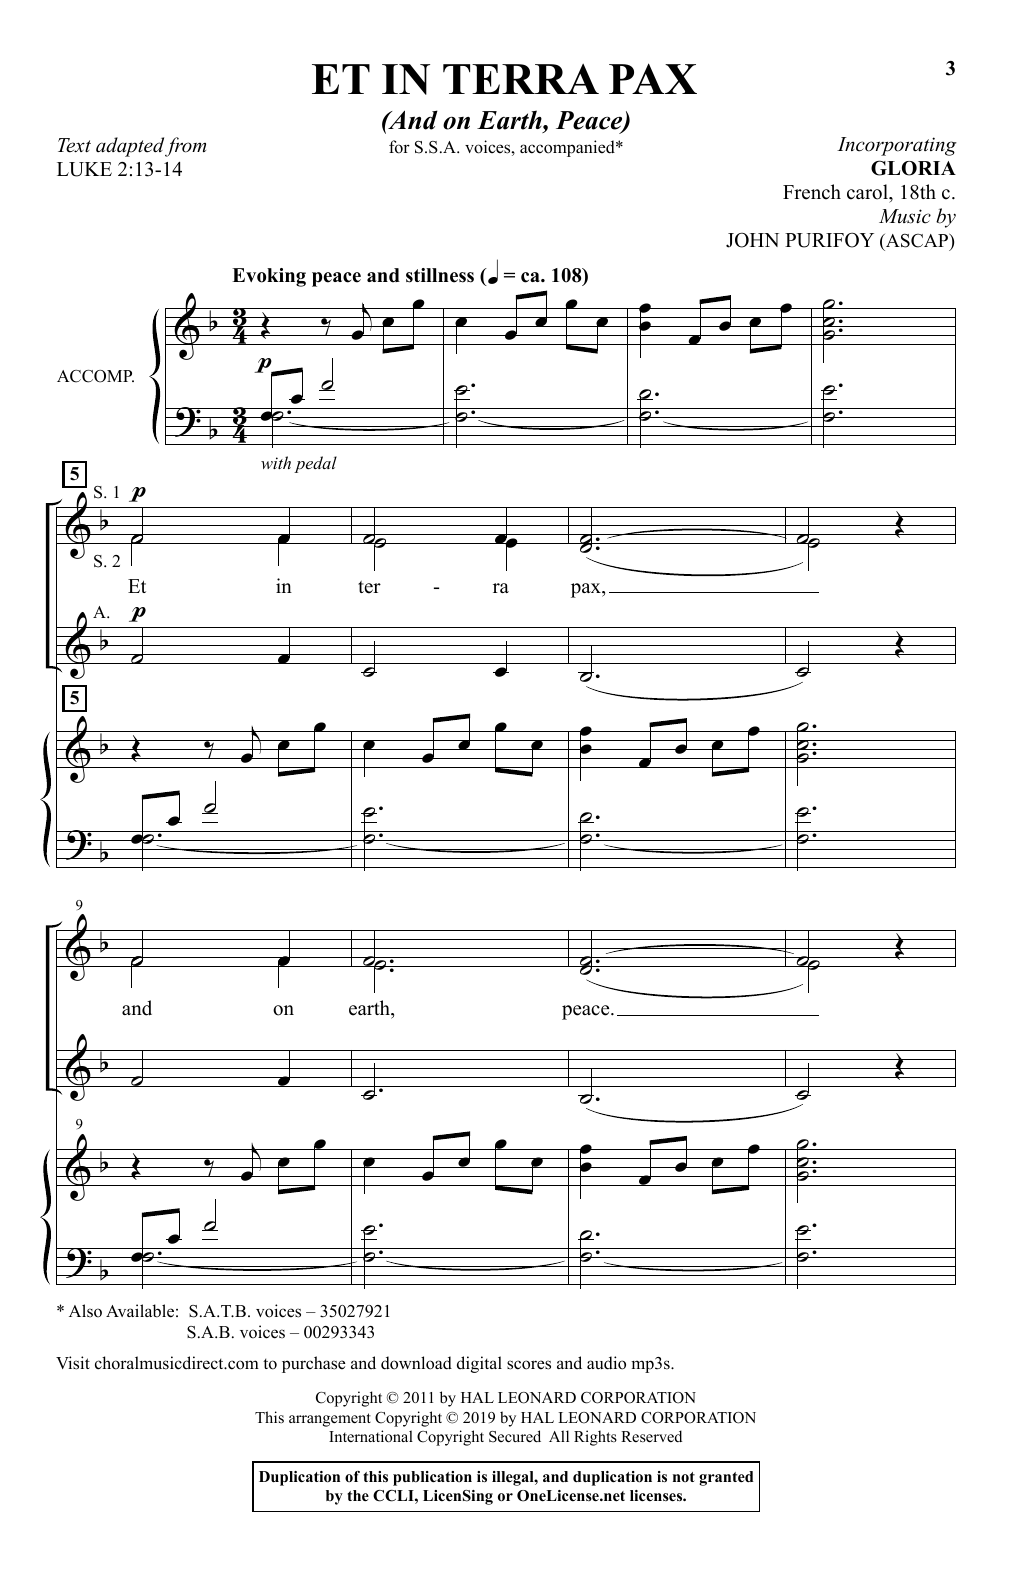 Download John Purifoy Et In Terra Pax (And On Earth, Peace) Sheet Music